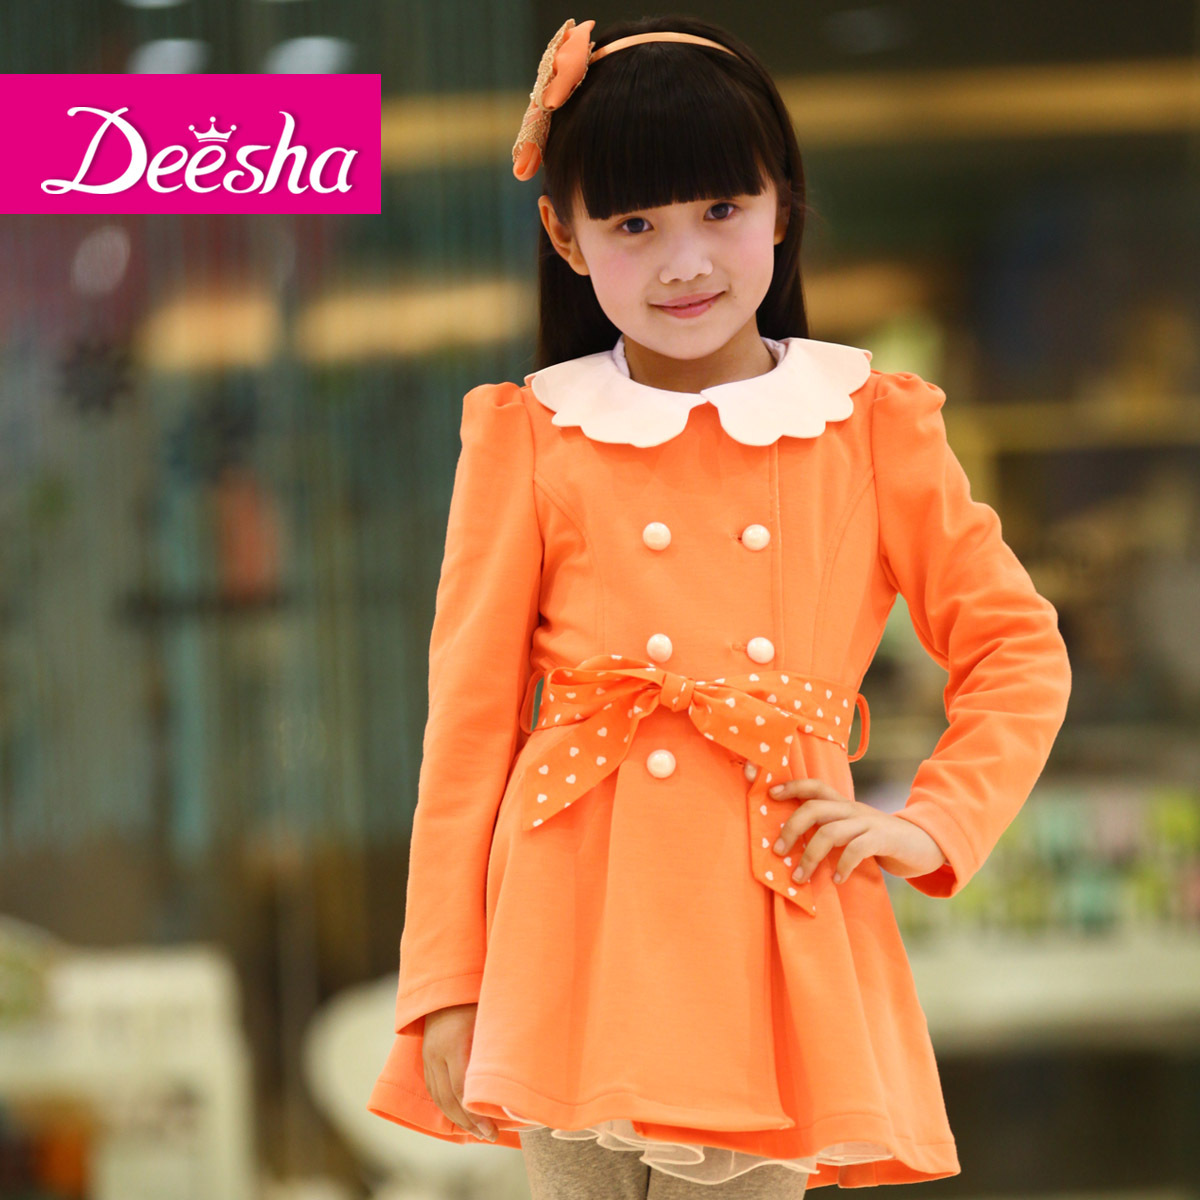 DEESHA 2012 autumn new arrival female clothing baby princess child long-sleeve trench 1217016